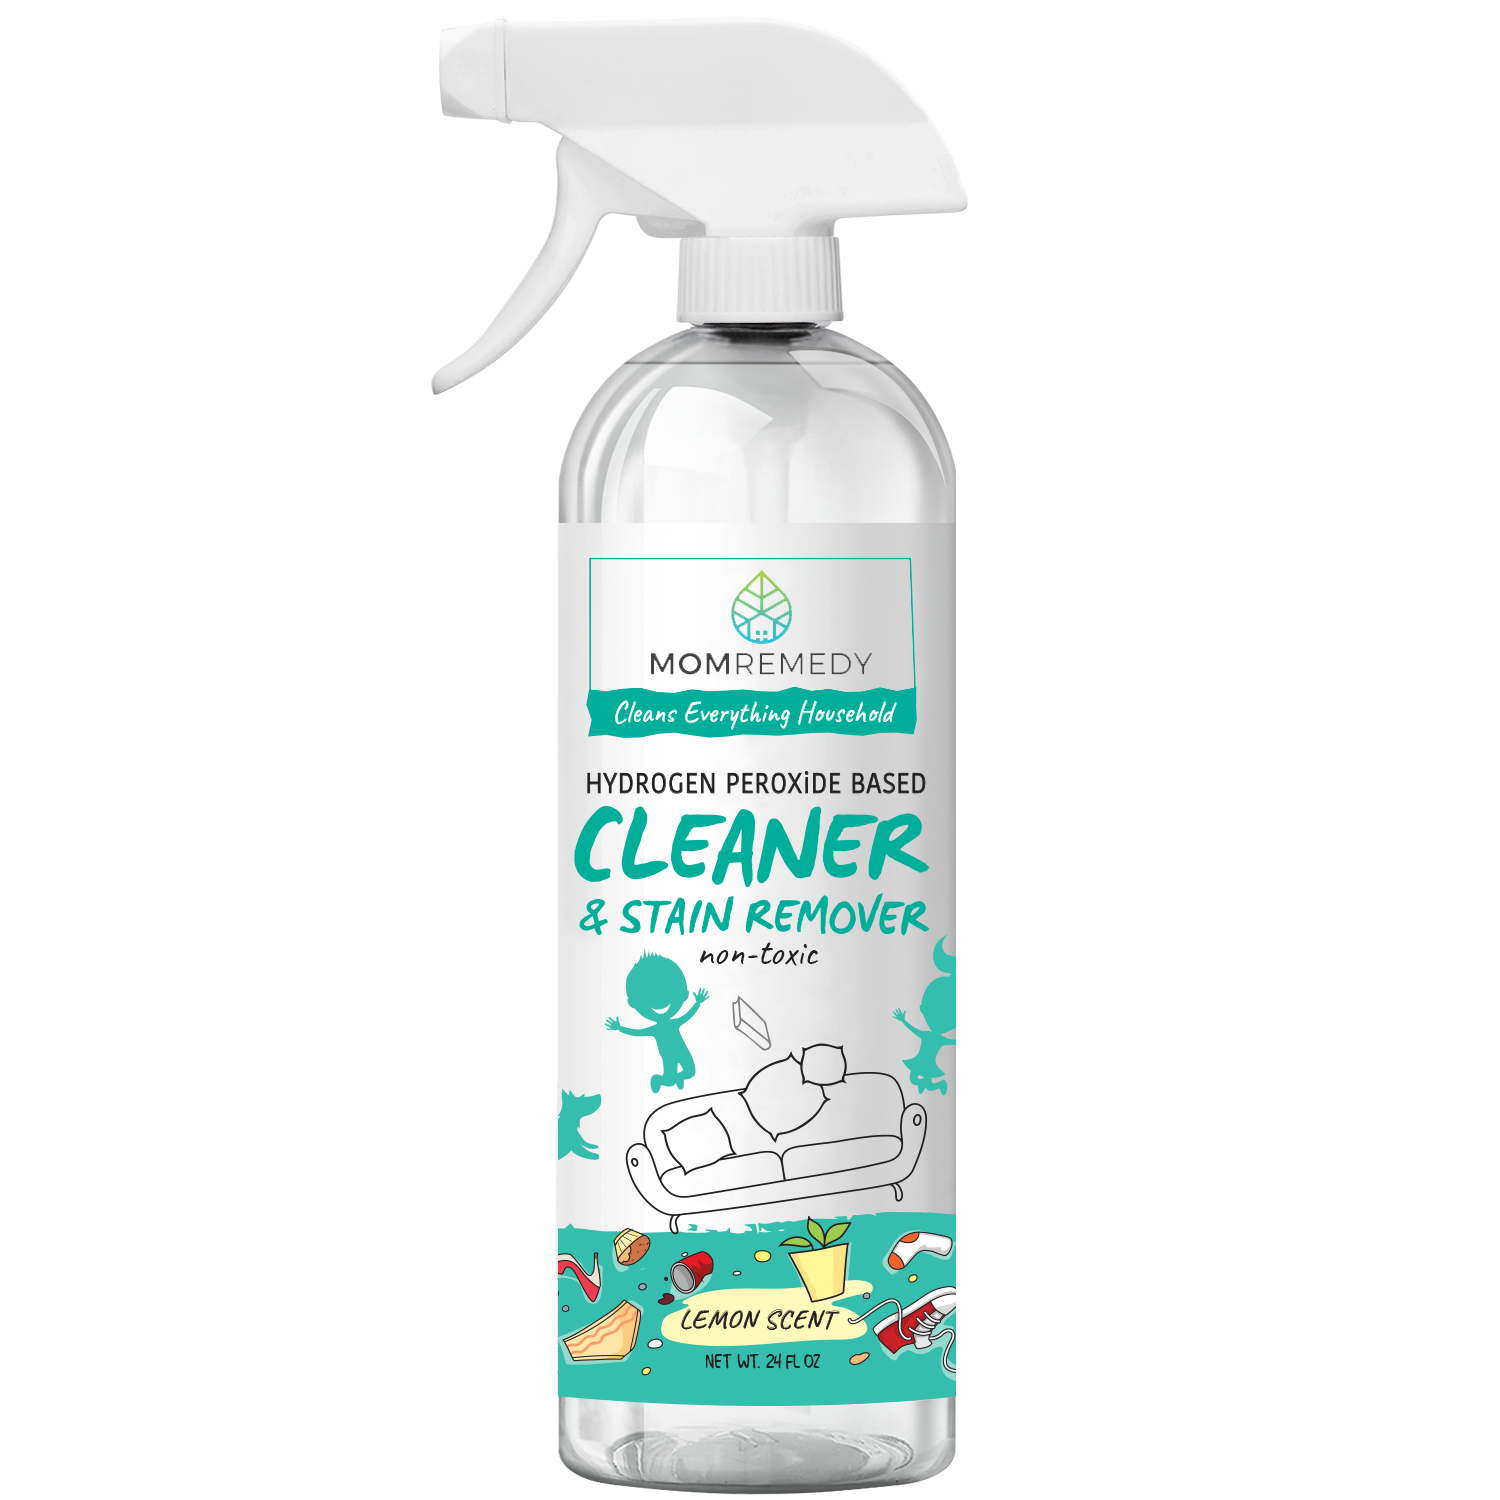 Hydrogen Peroxide Based Household Cleaner and Stain Remover - 3 Pack of 24 oz